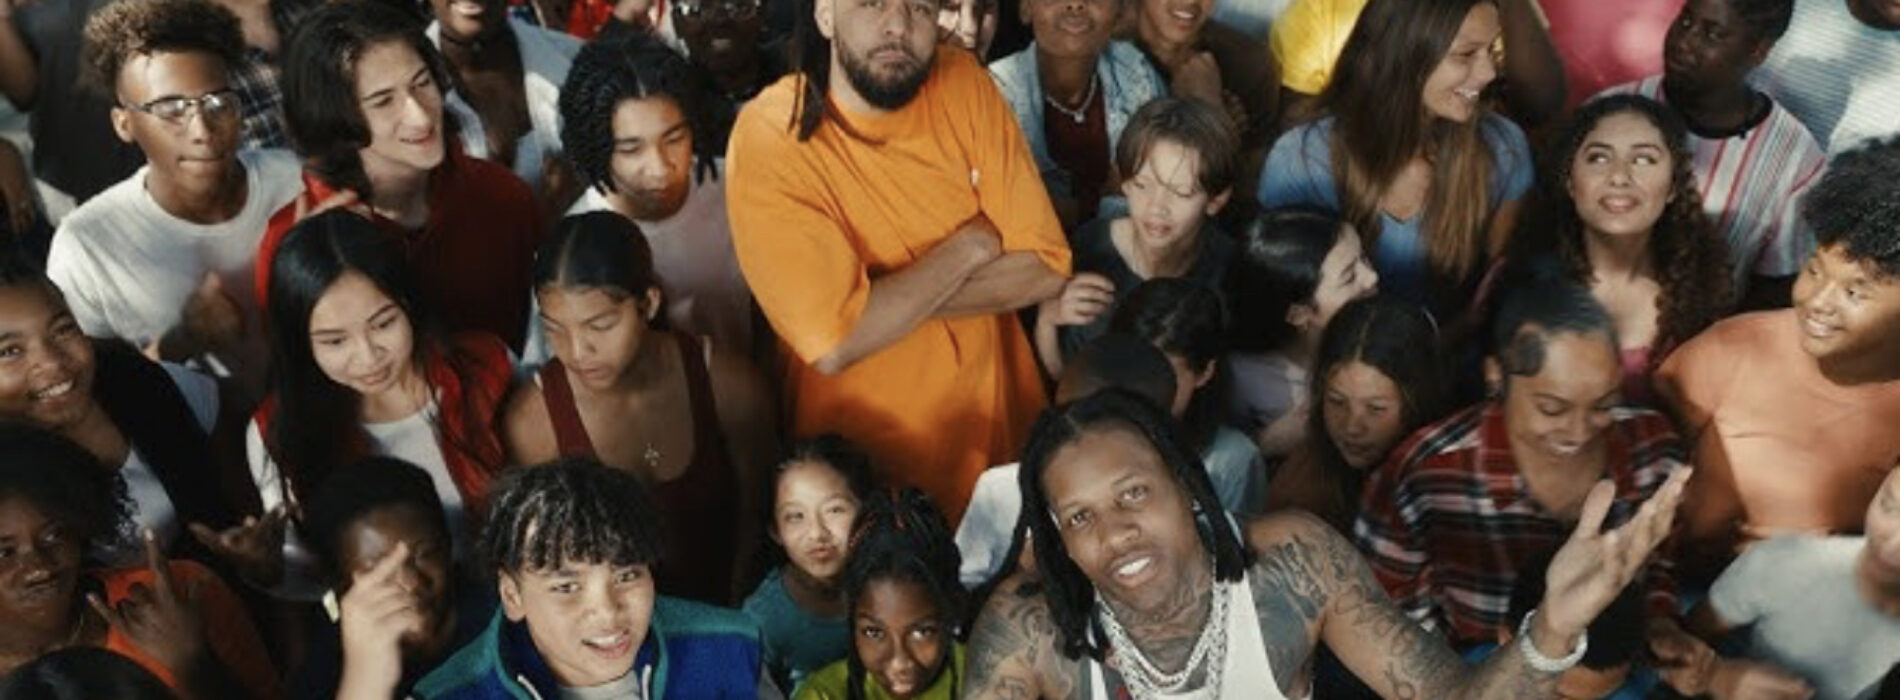 Lil Durk – All My Life ft. J. Cole (Official Video) – Mai 2023